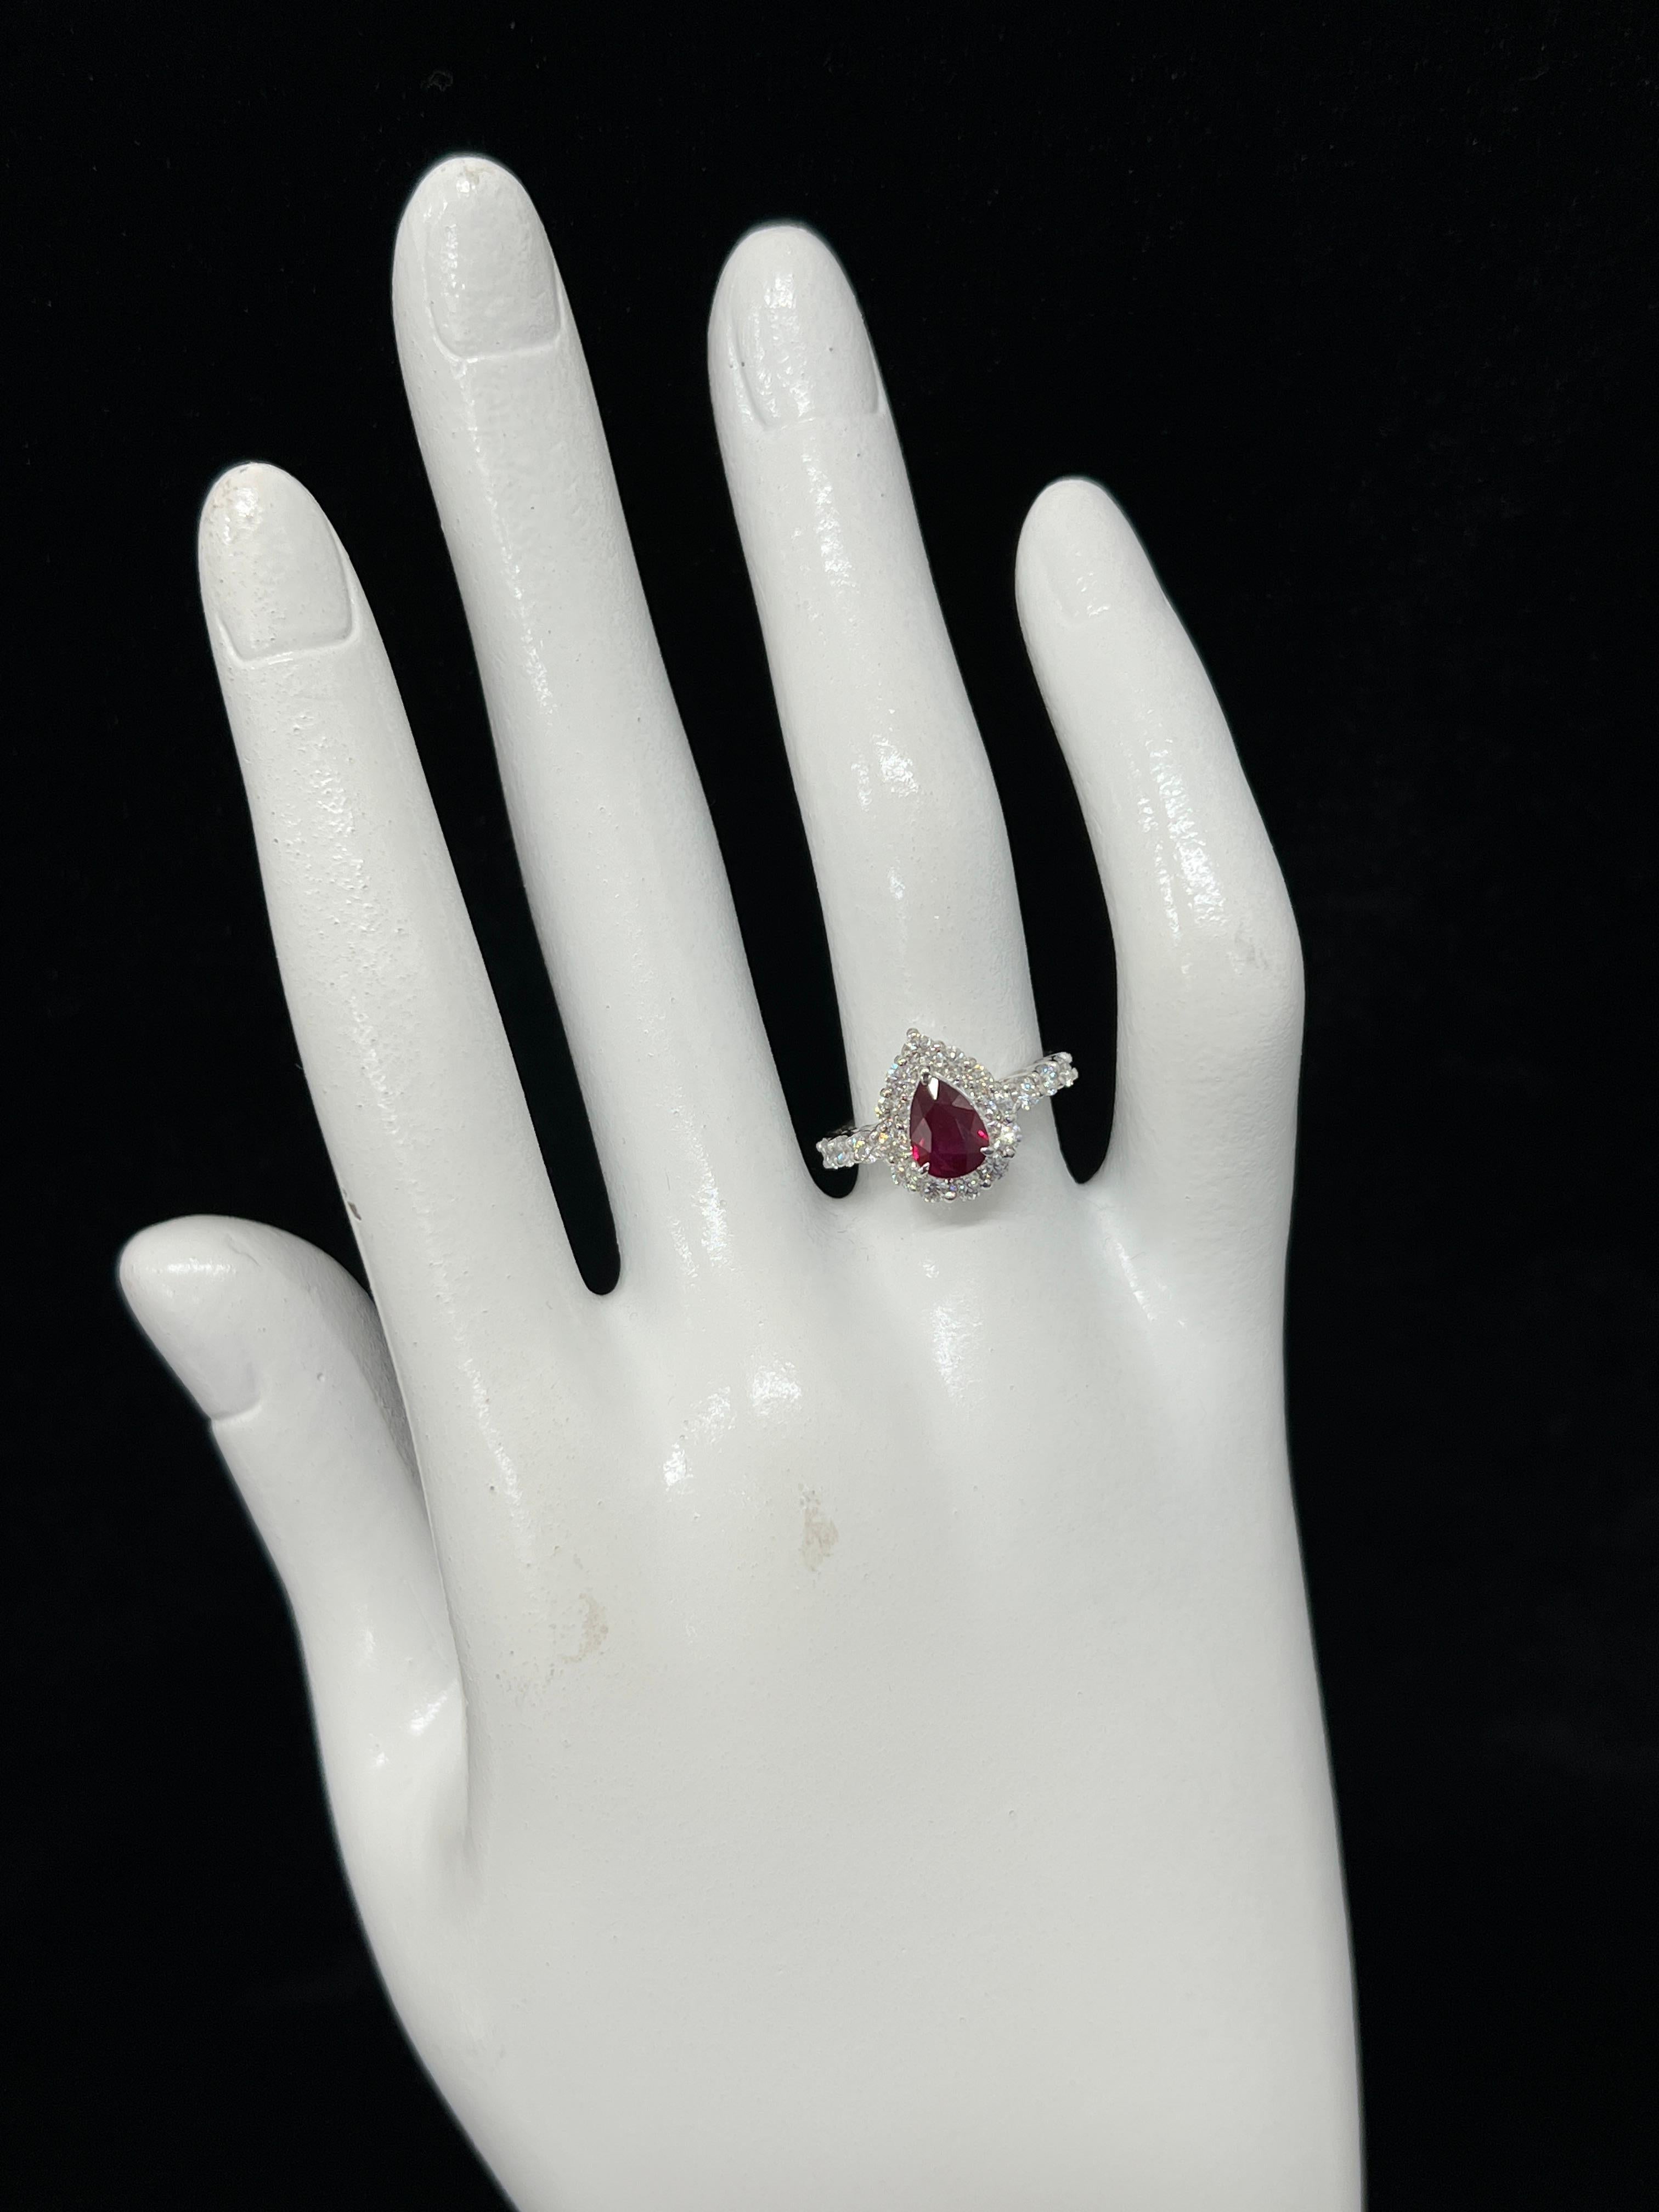 Women's GIA Certified 1.03 Carat, Pigeon Blood Red, Burmese Ruby Ring Made in Platinum For Sale